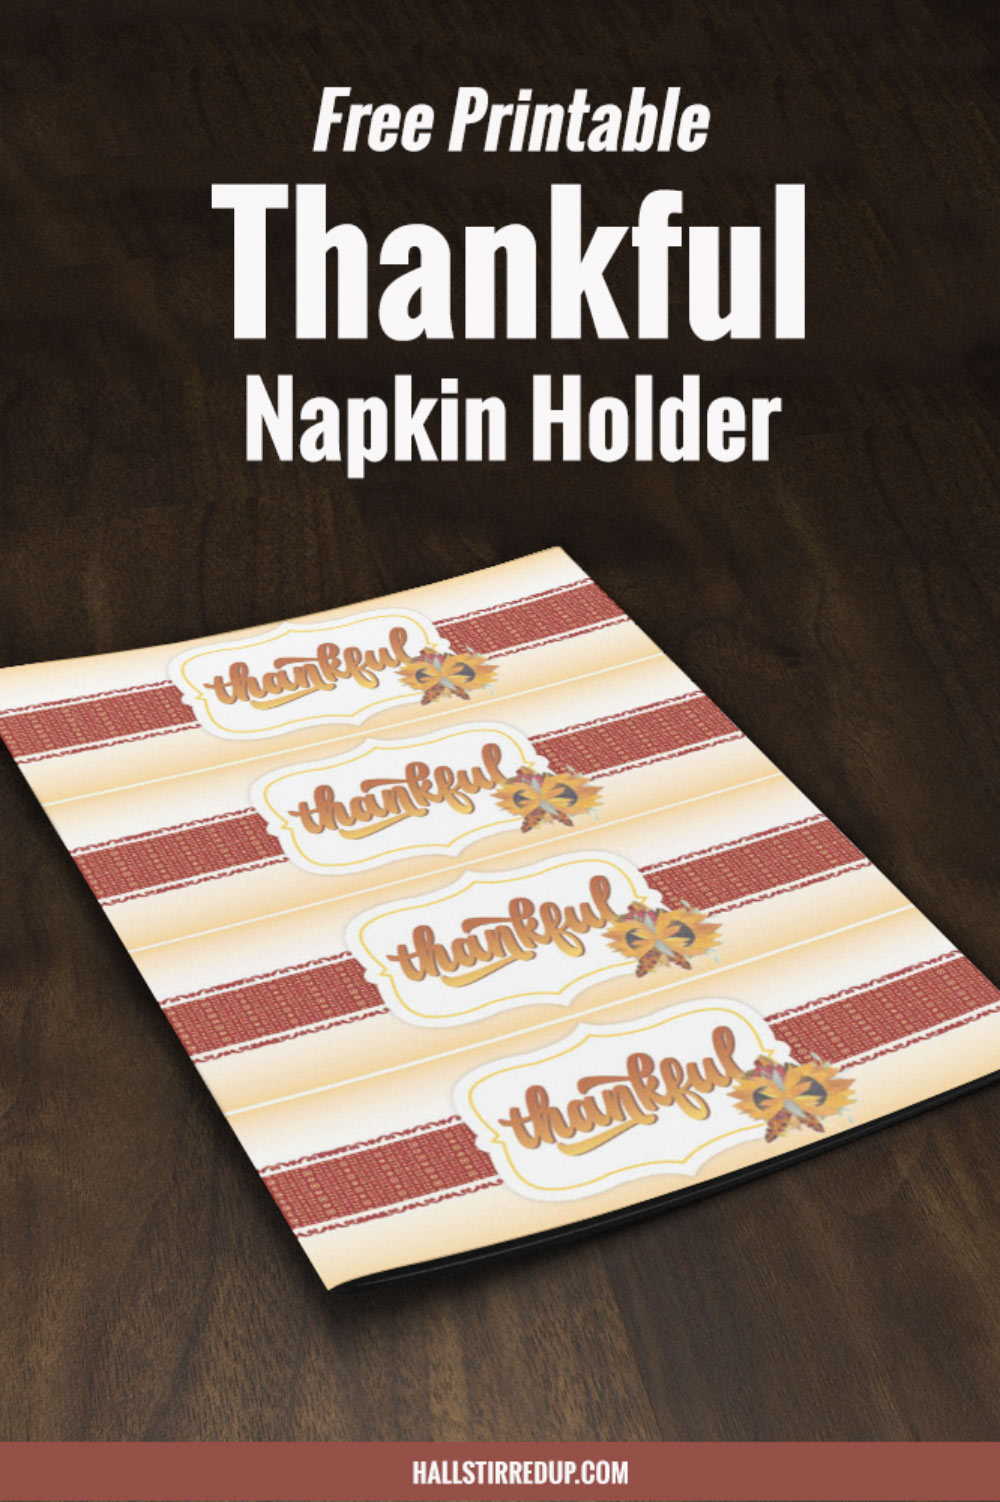 Why be grateful Includes free printable Thanksgiving napkin rings